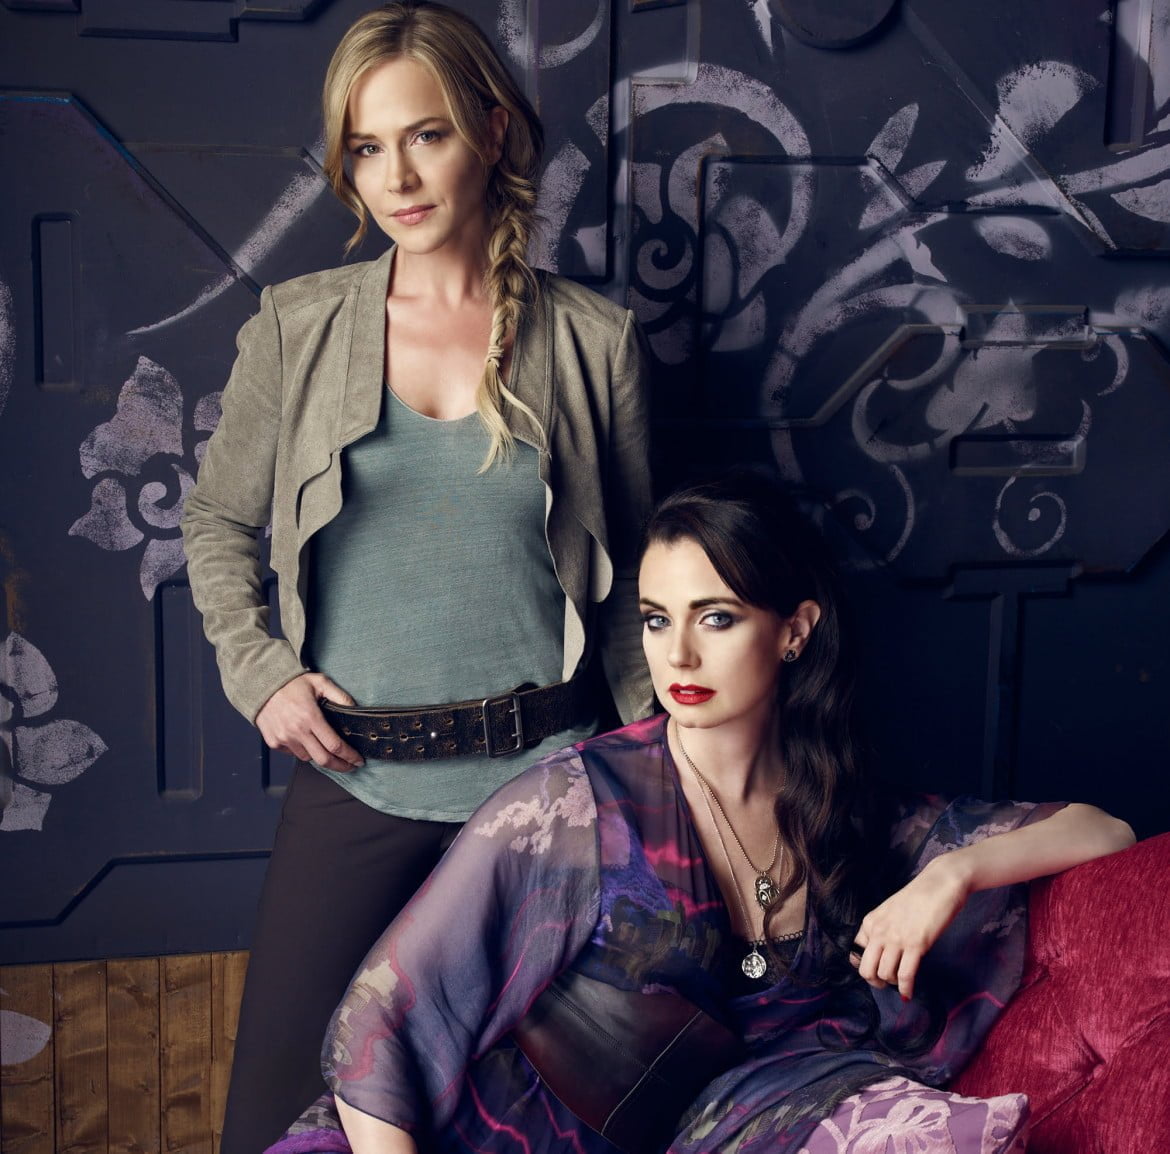 Julie Benz and Mia Kirshner in Defiance